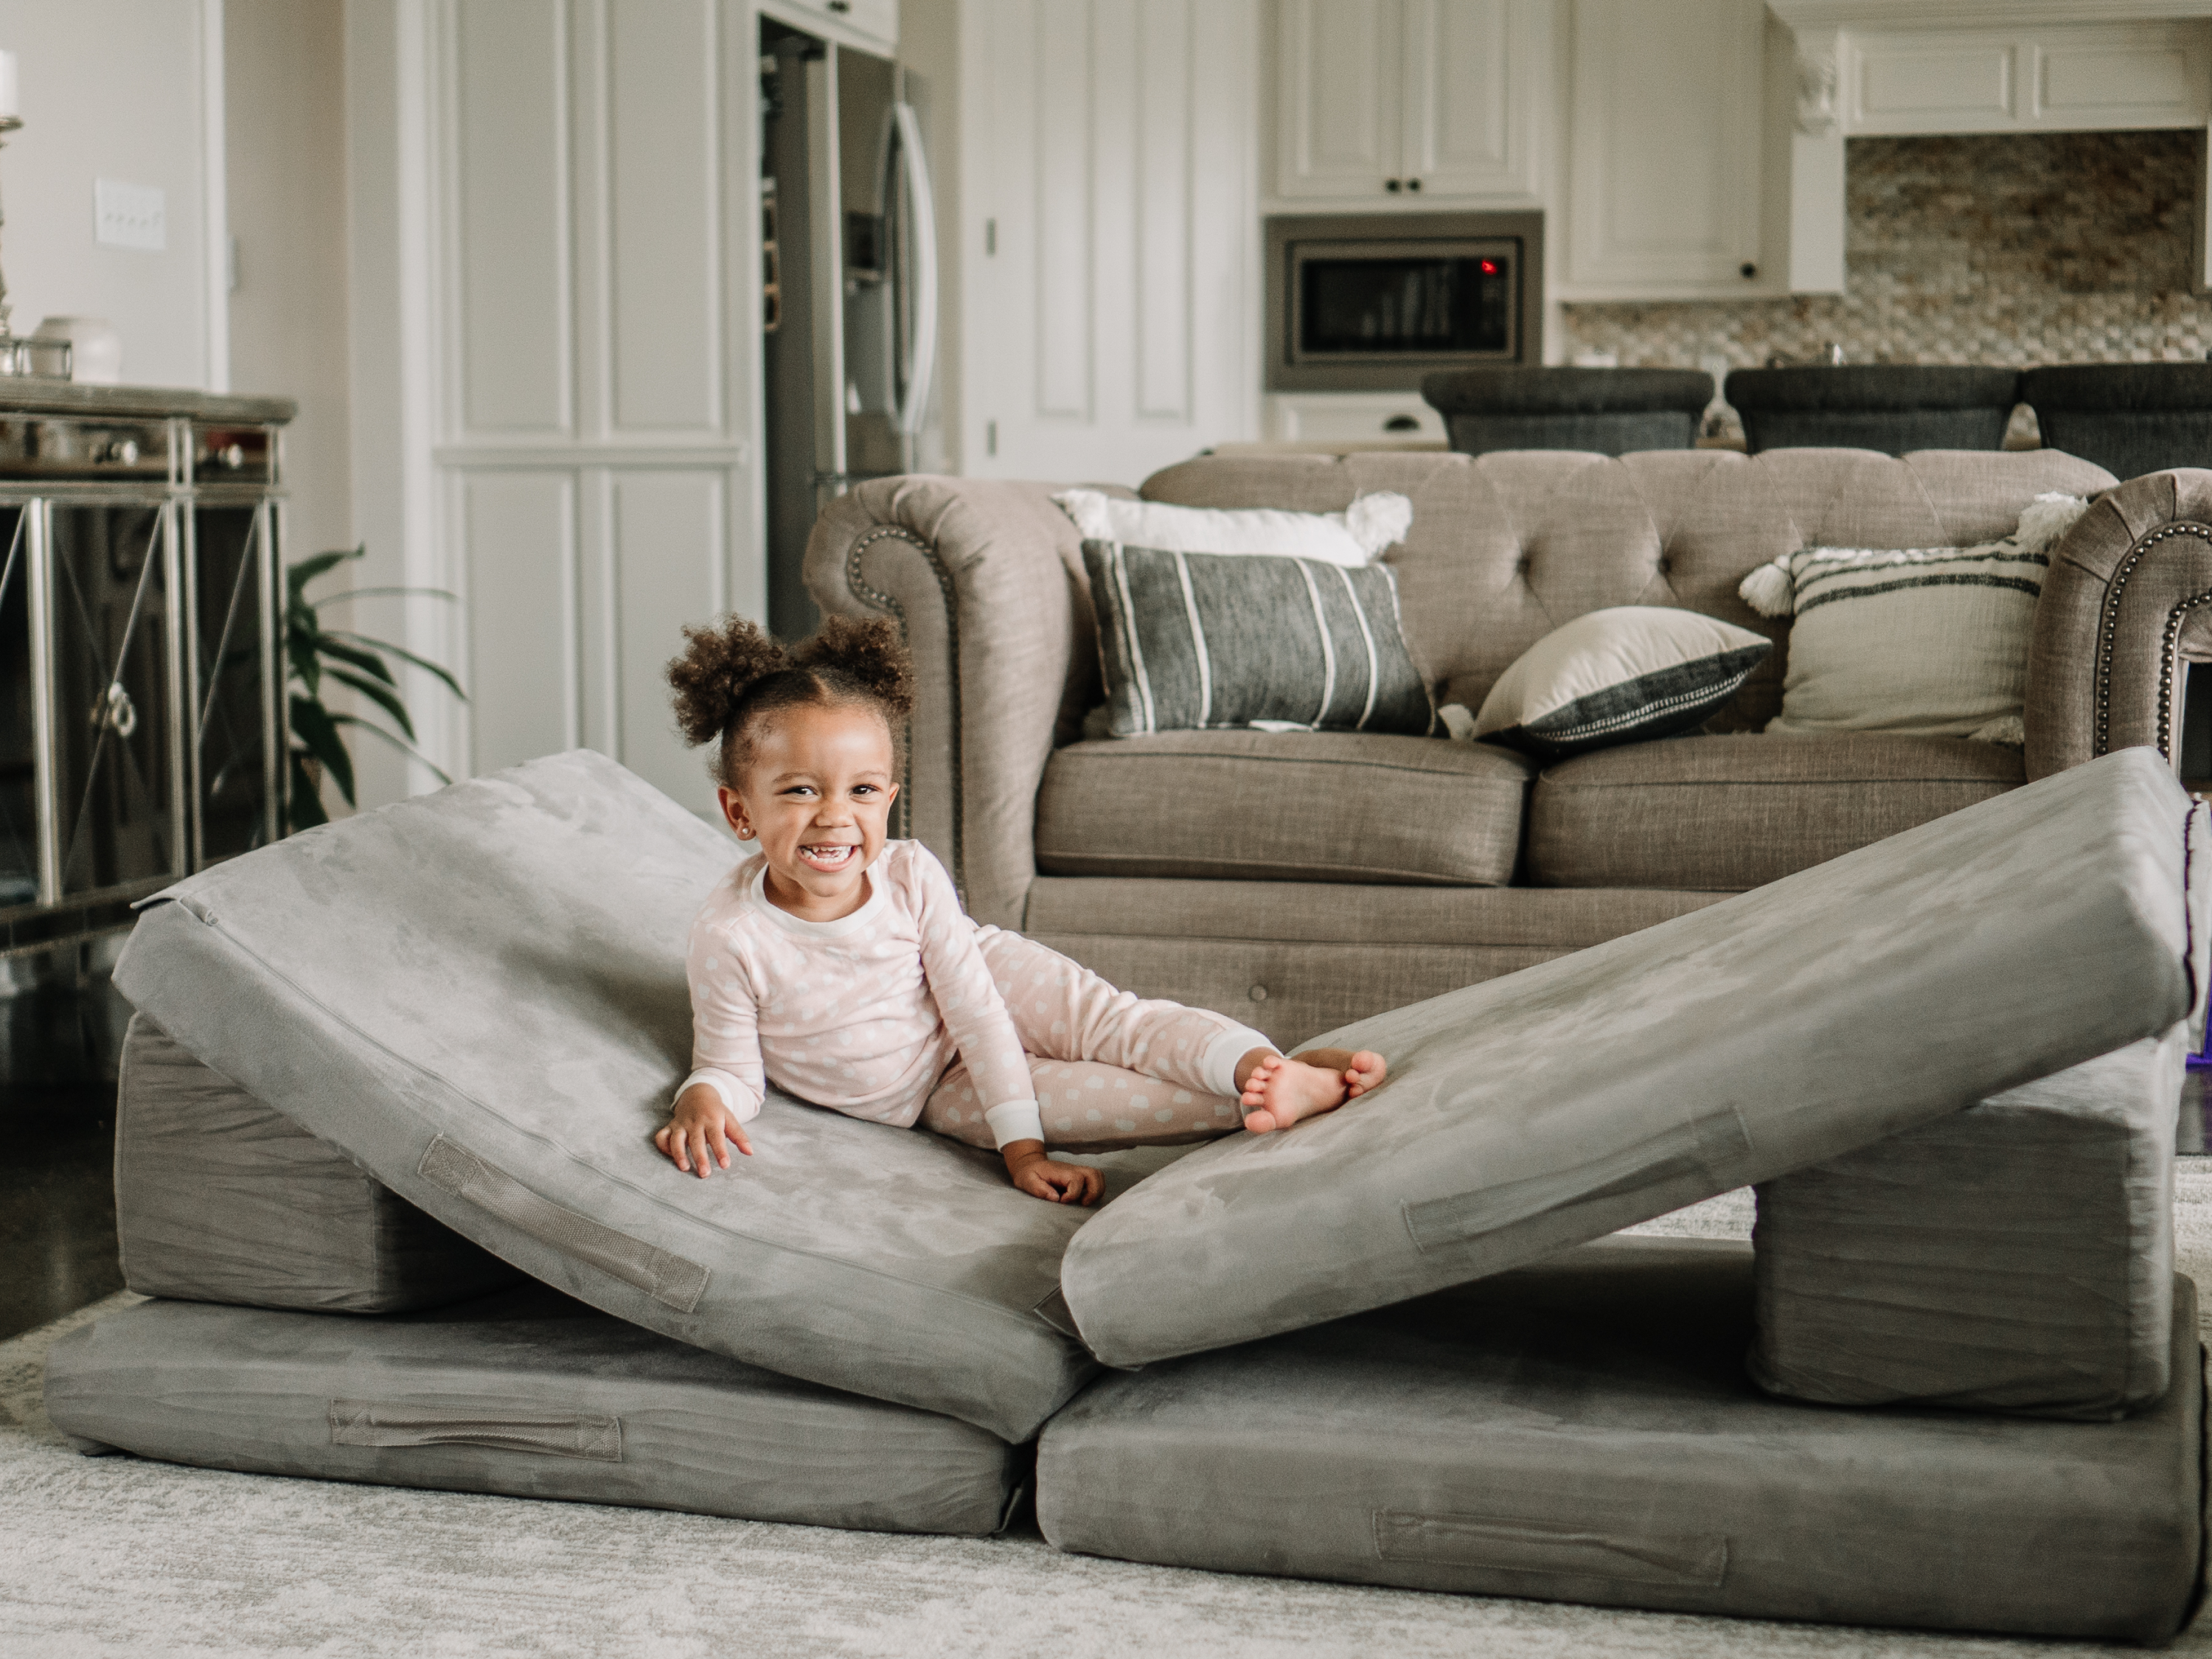 The Figgy Play Couch Lifestyle